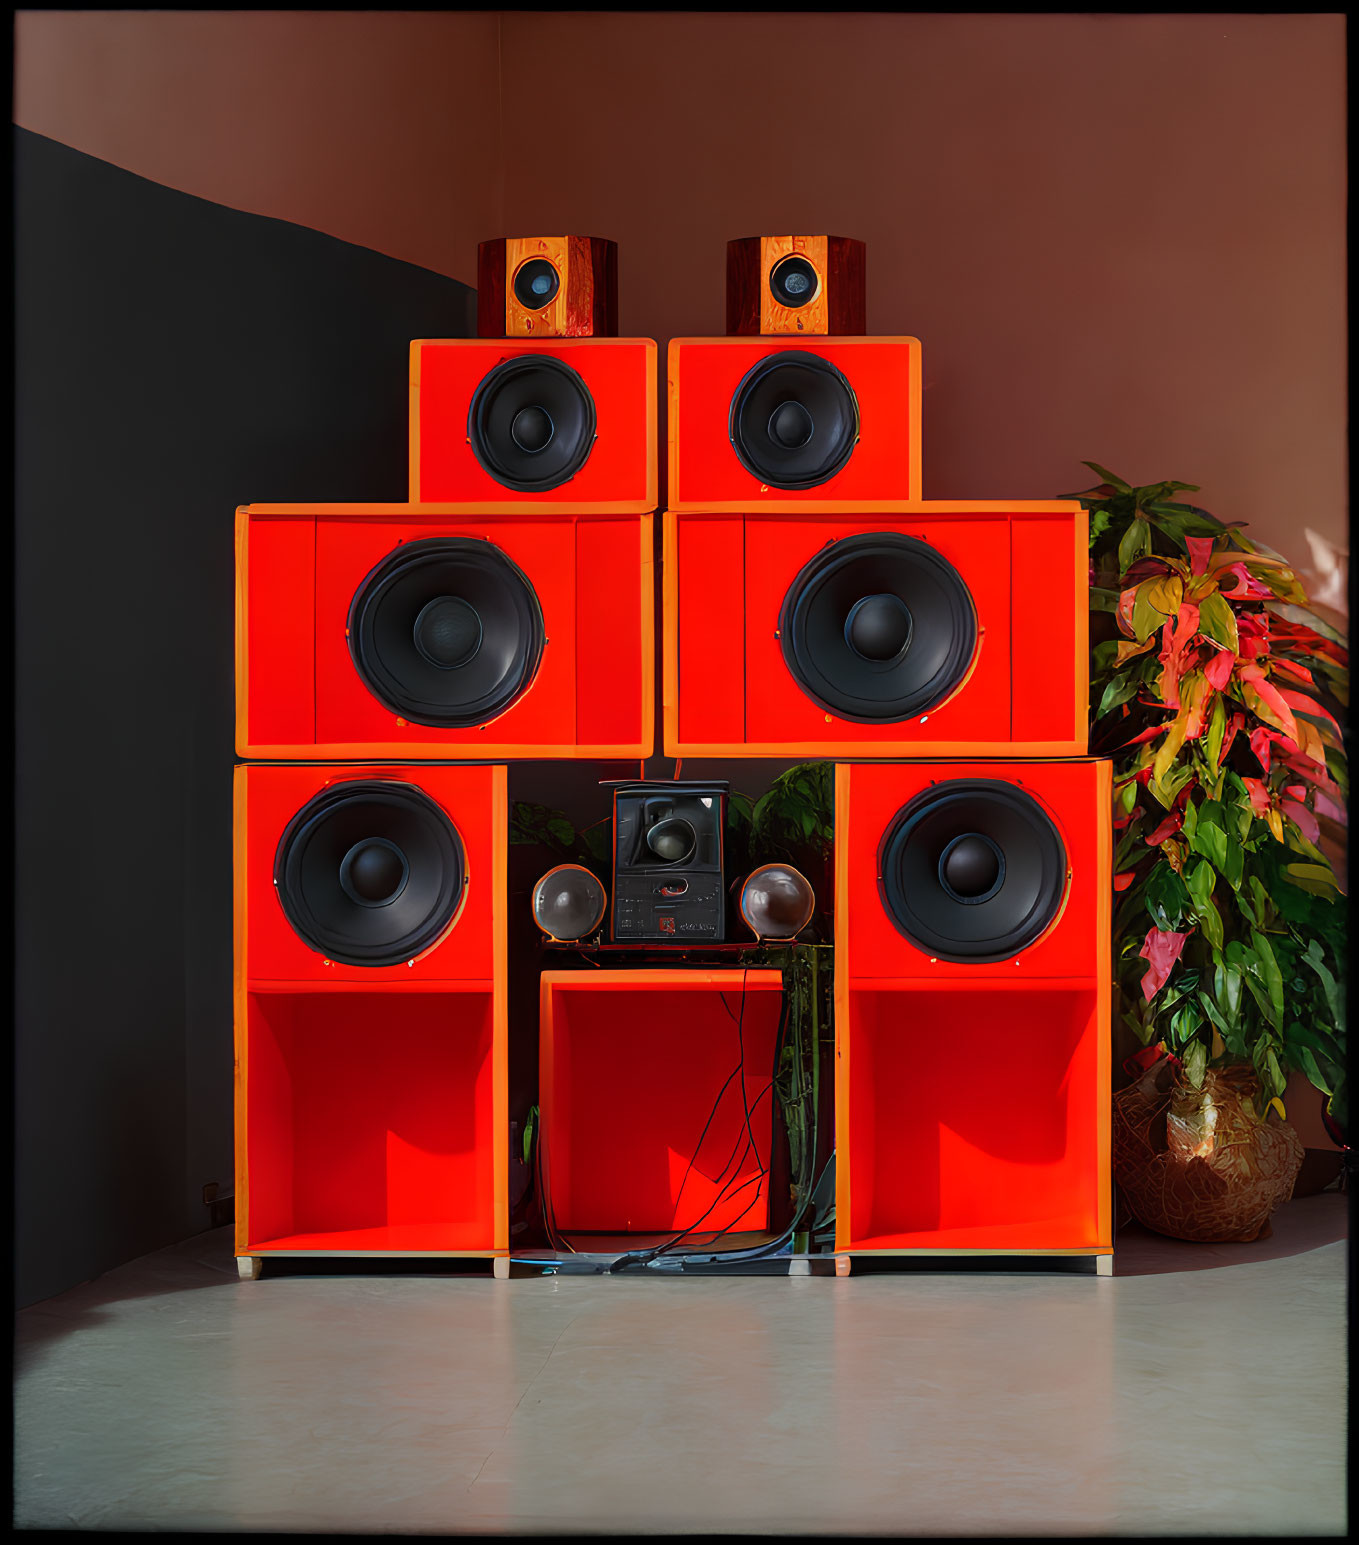 Red speakers on shelf with audio equipment against shadowed backdrop